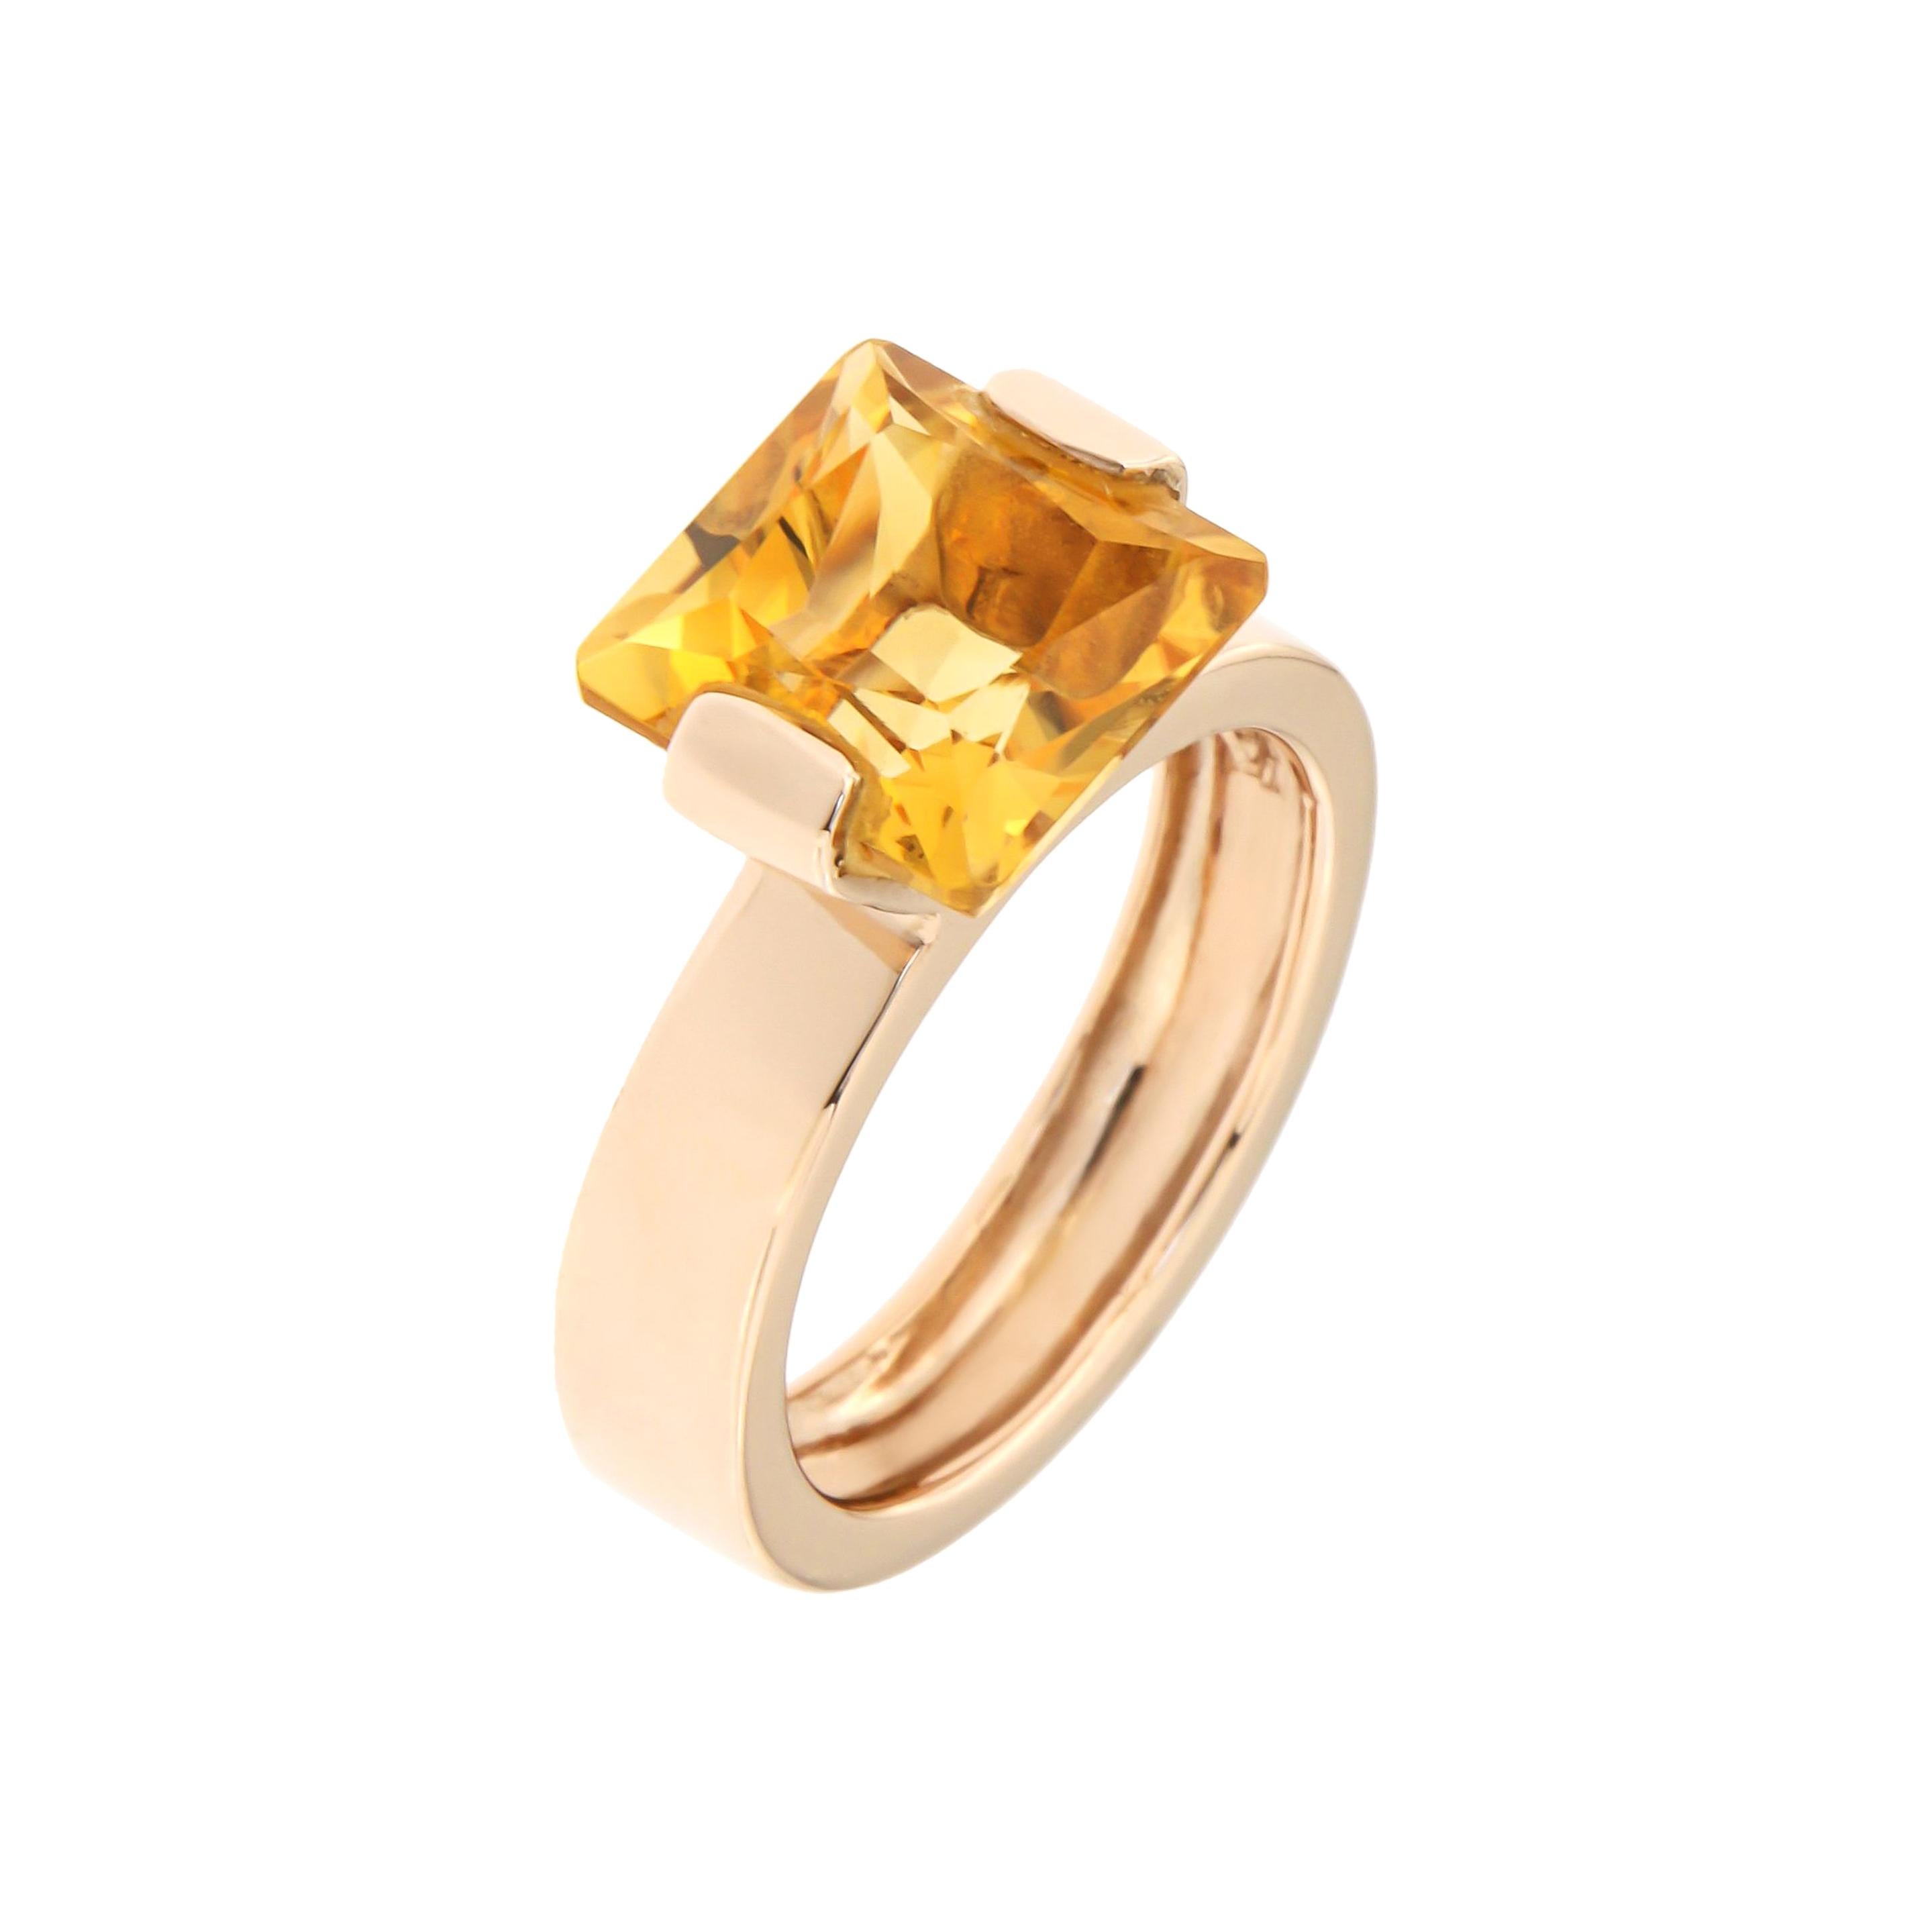 Citrine Rose Gold Band Ring Handcrafted In Italy by Botta Gioielli